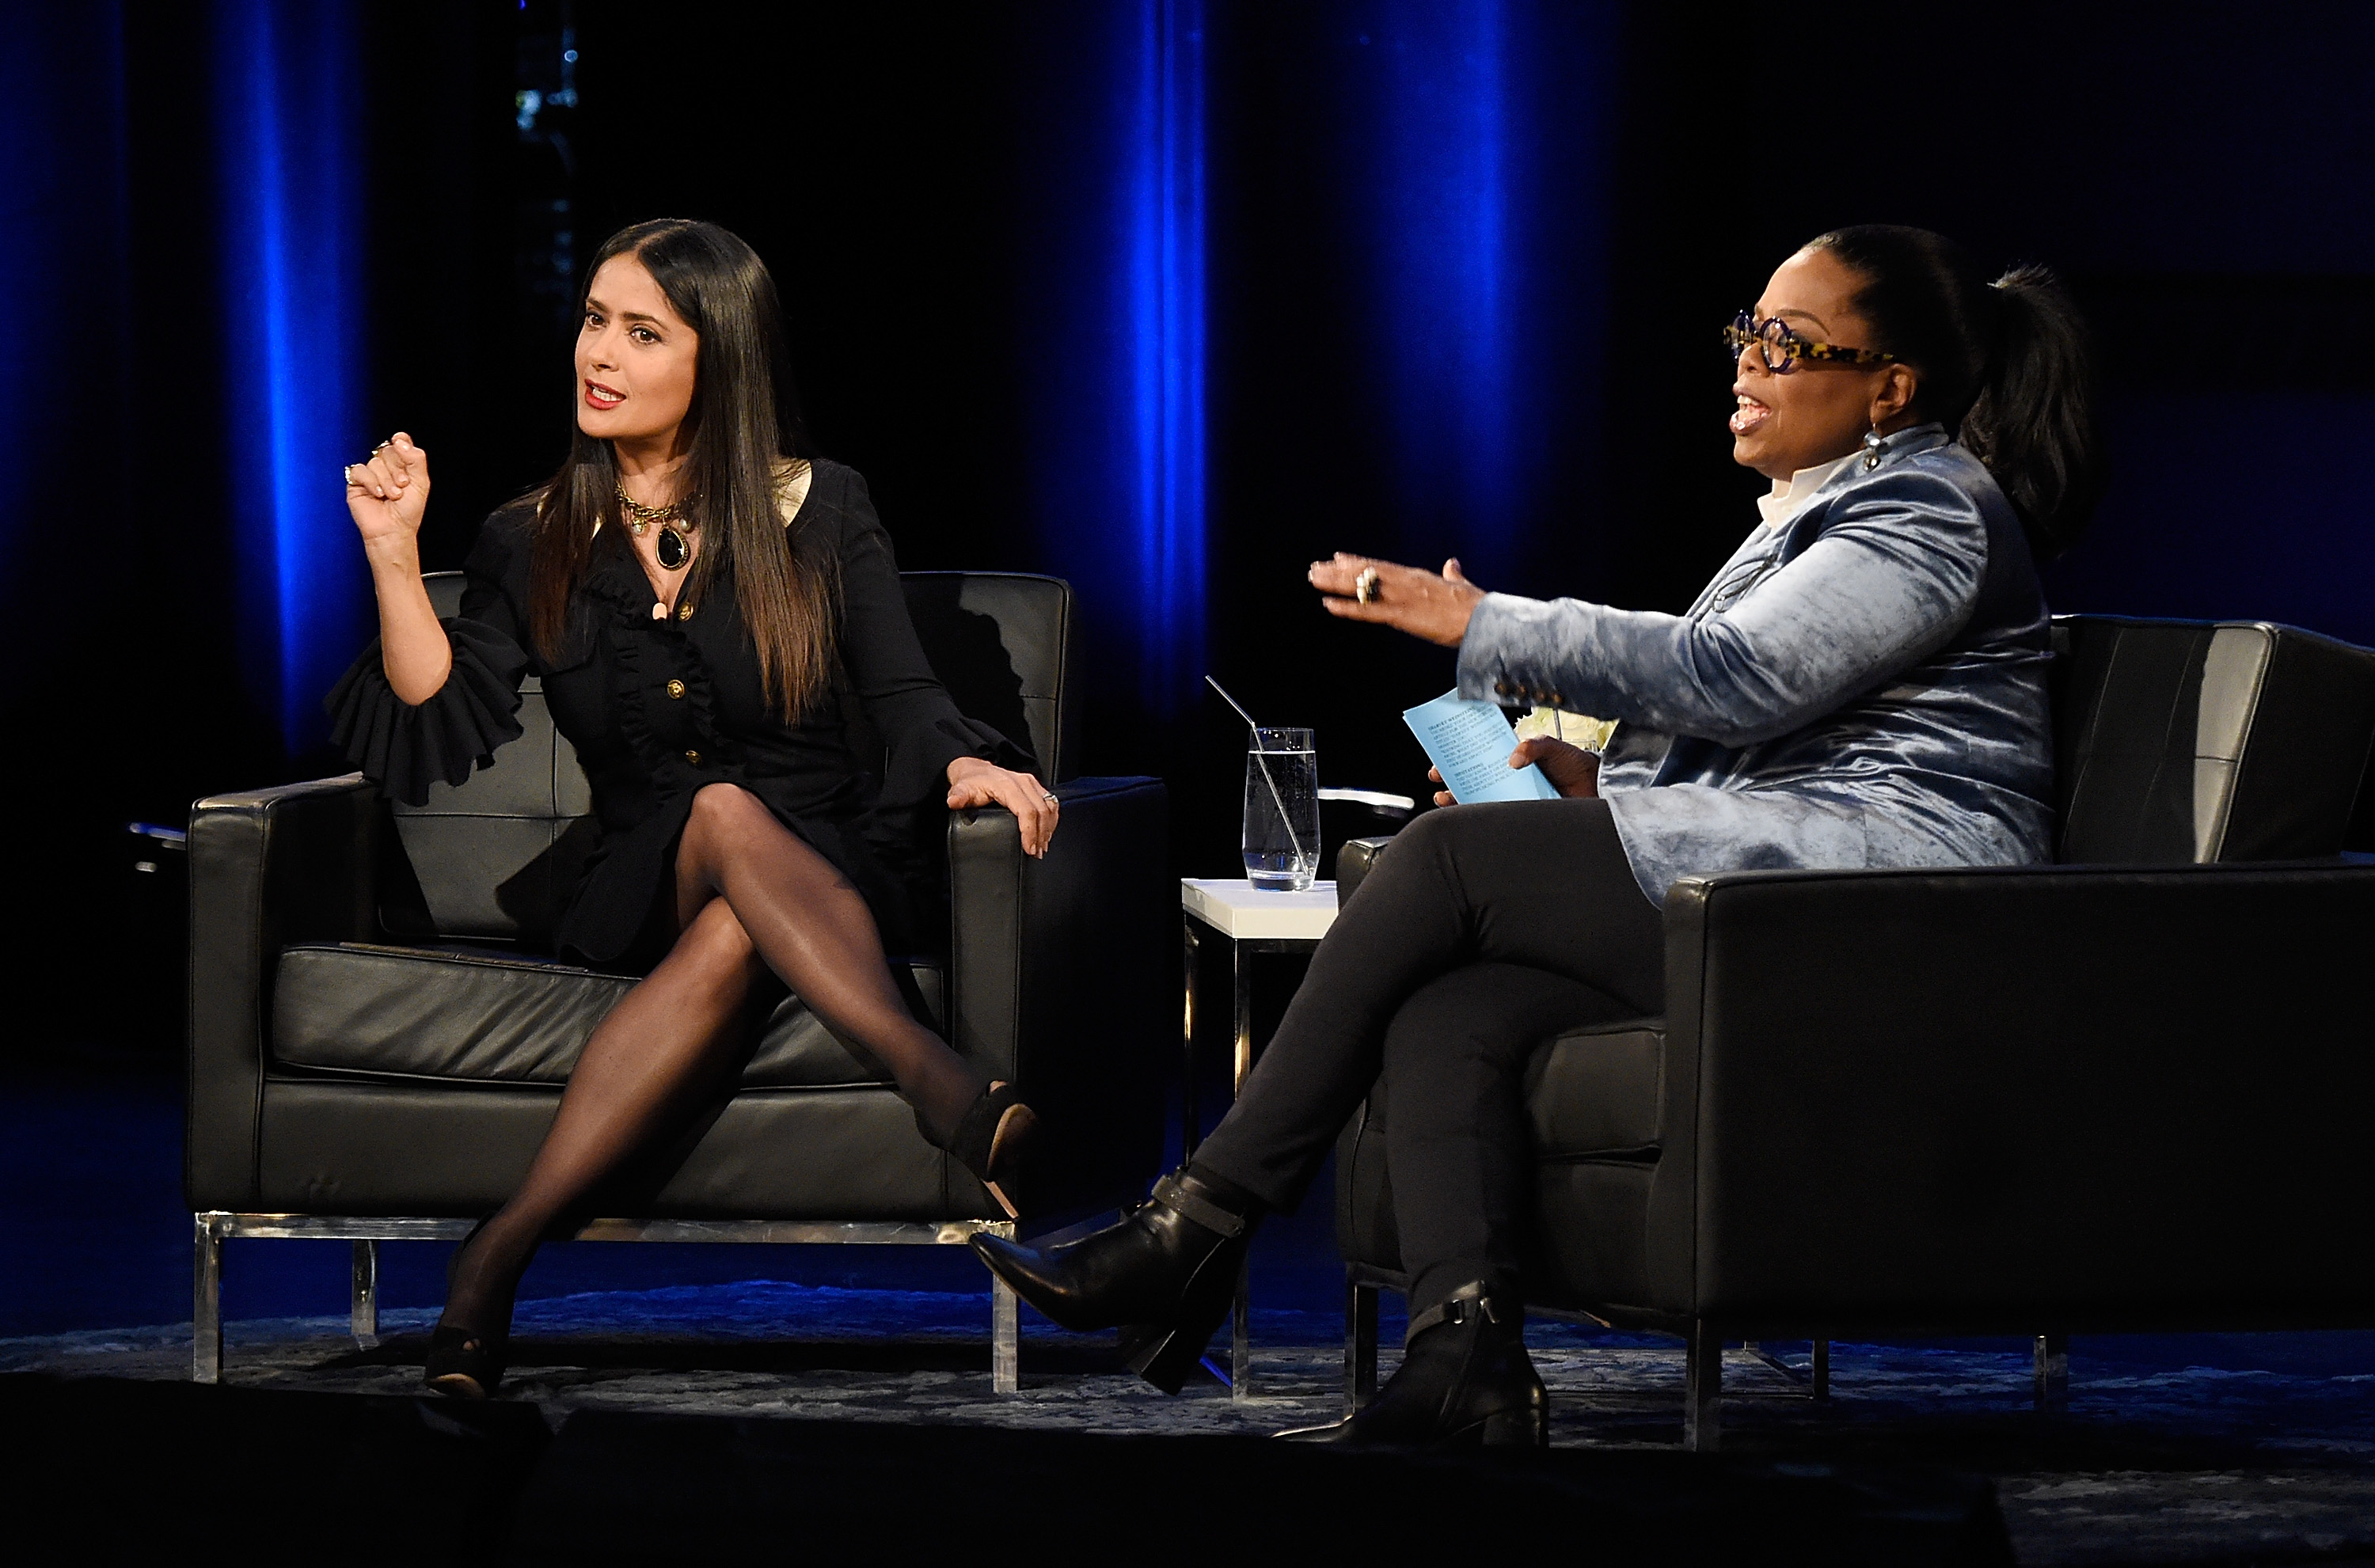 Salma Hayek Pinault and Oprah speak onstage during "Oprah's Super Soul Conversations" at The Apollo Theater on February 7, 2018 in New York City (Kevin Mazur&mdash;Getty Images)